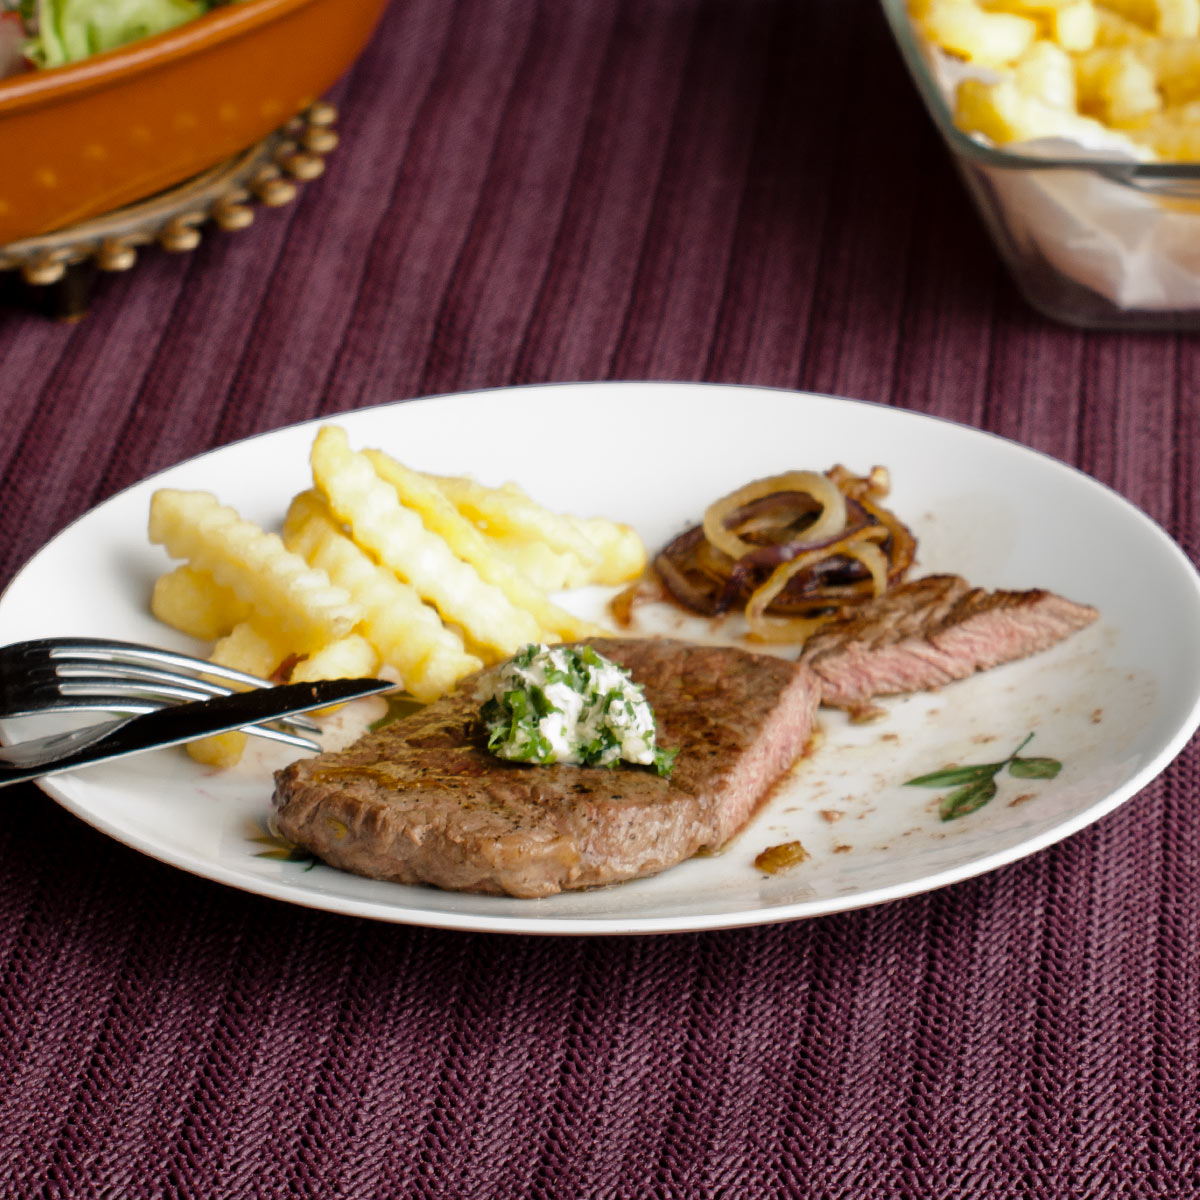 Beef Steak with Herb Butter